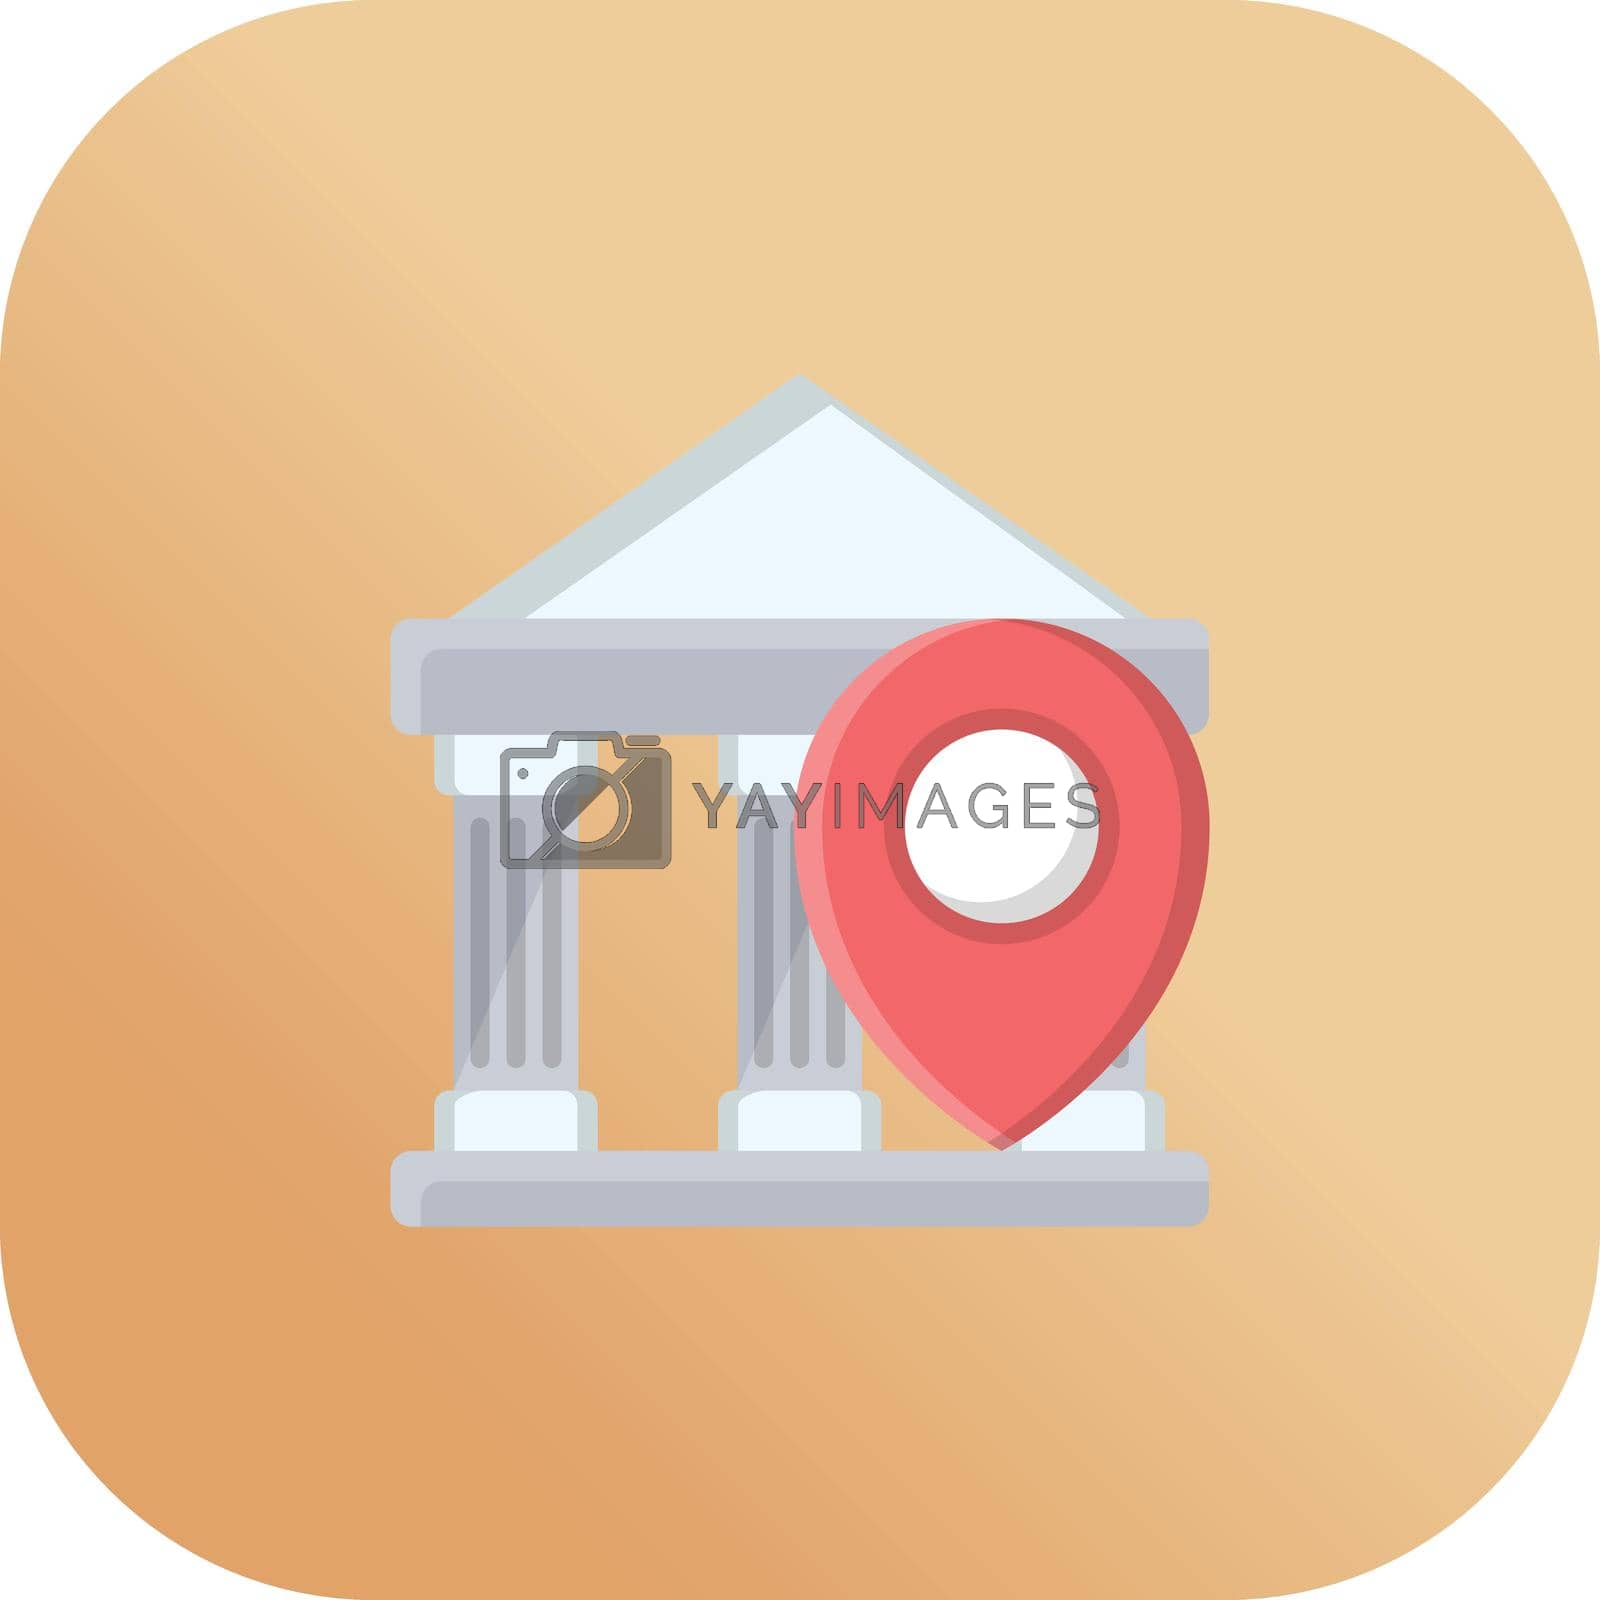 Royalty free image of bank by FlaticonsDesign